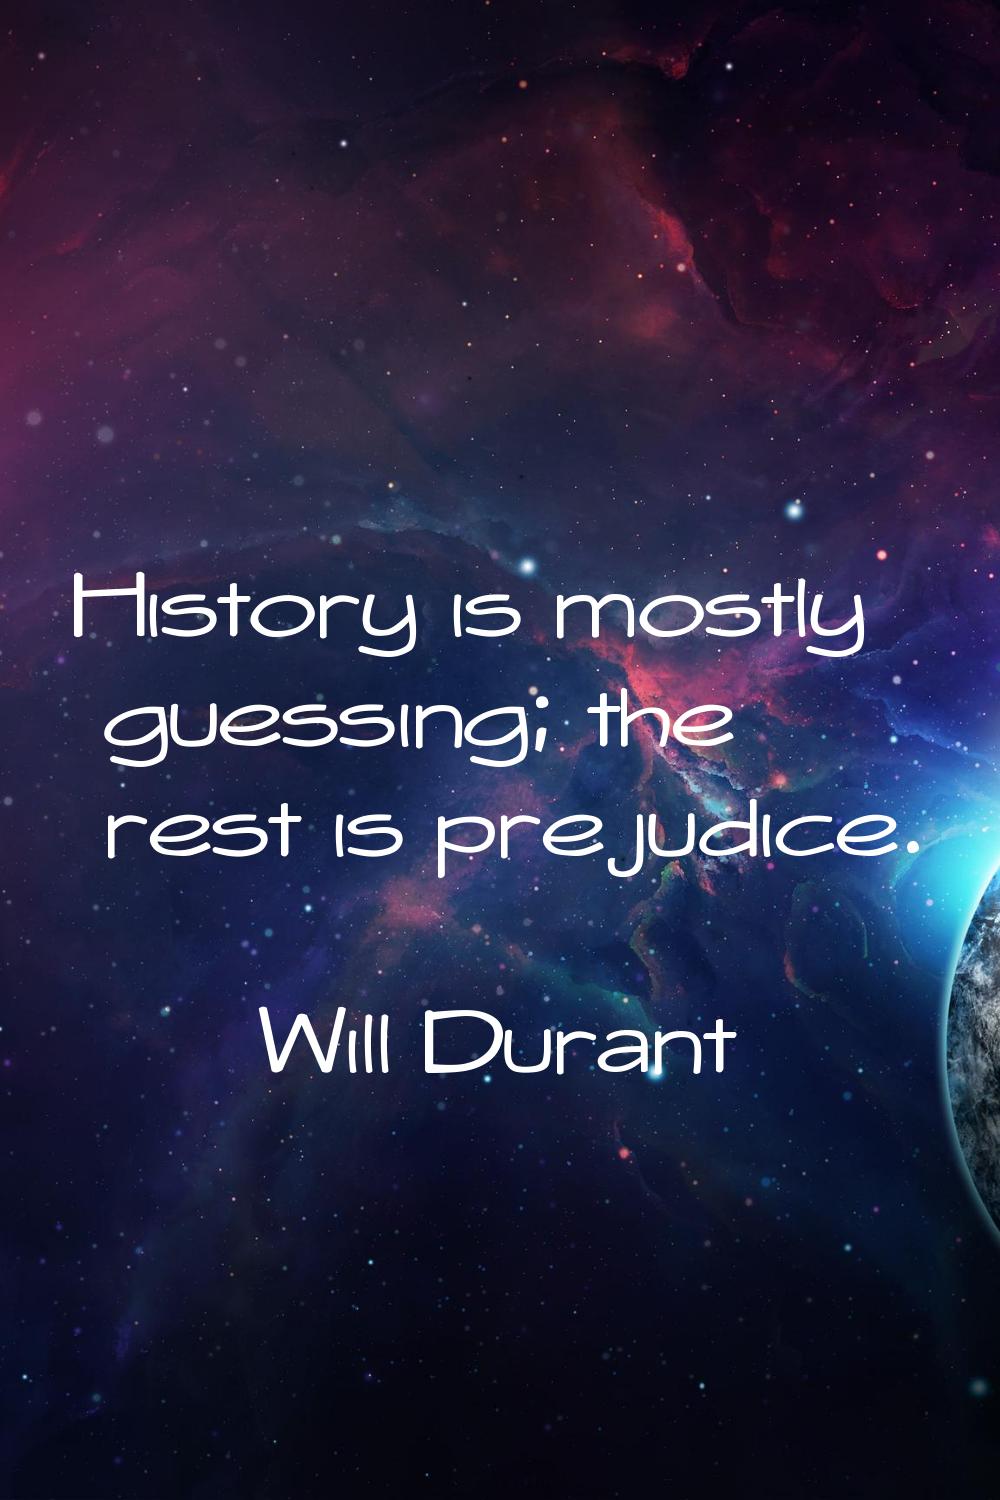 History is mostly guessing; the rest is prejudice.